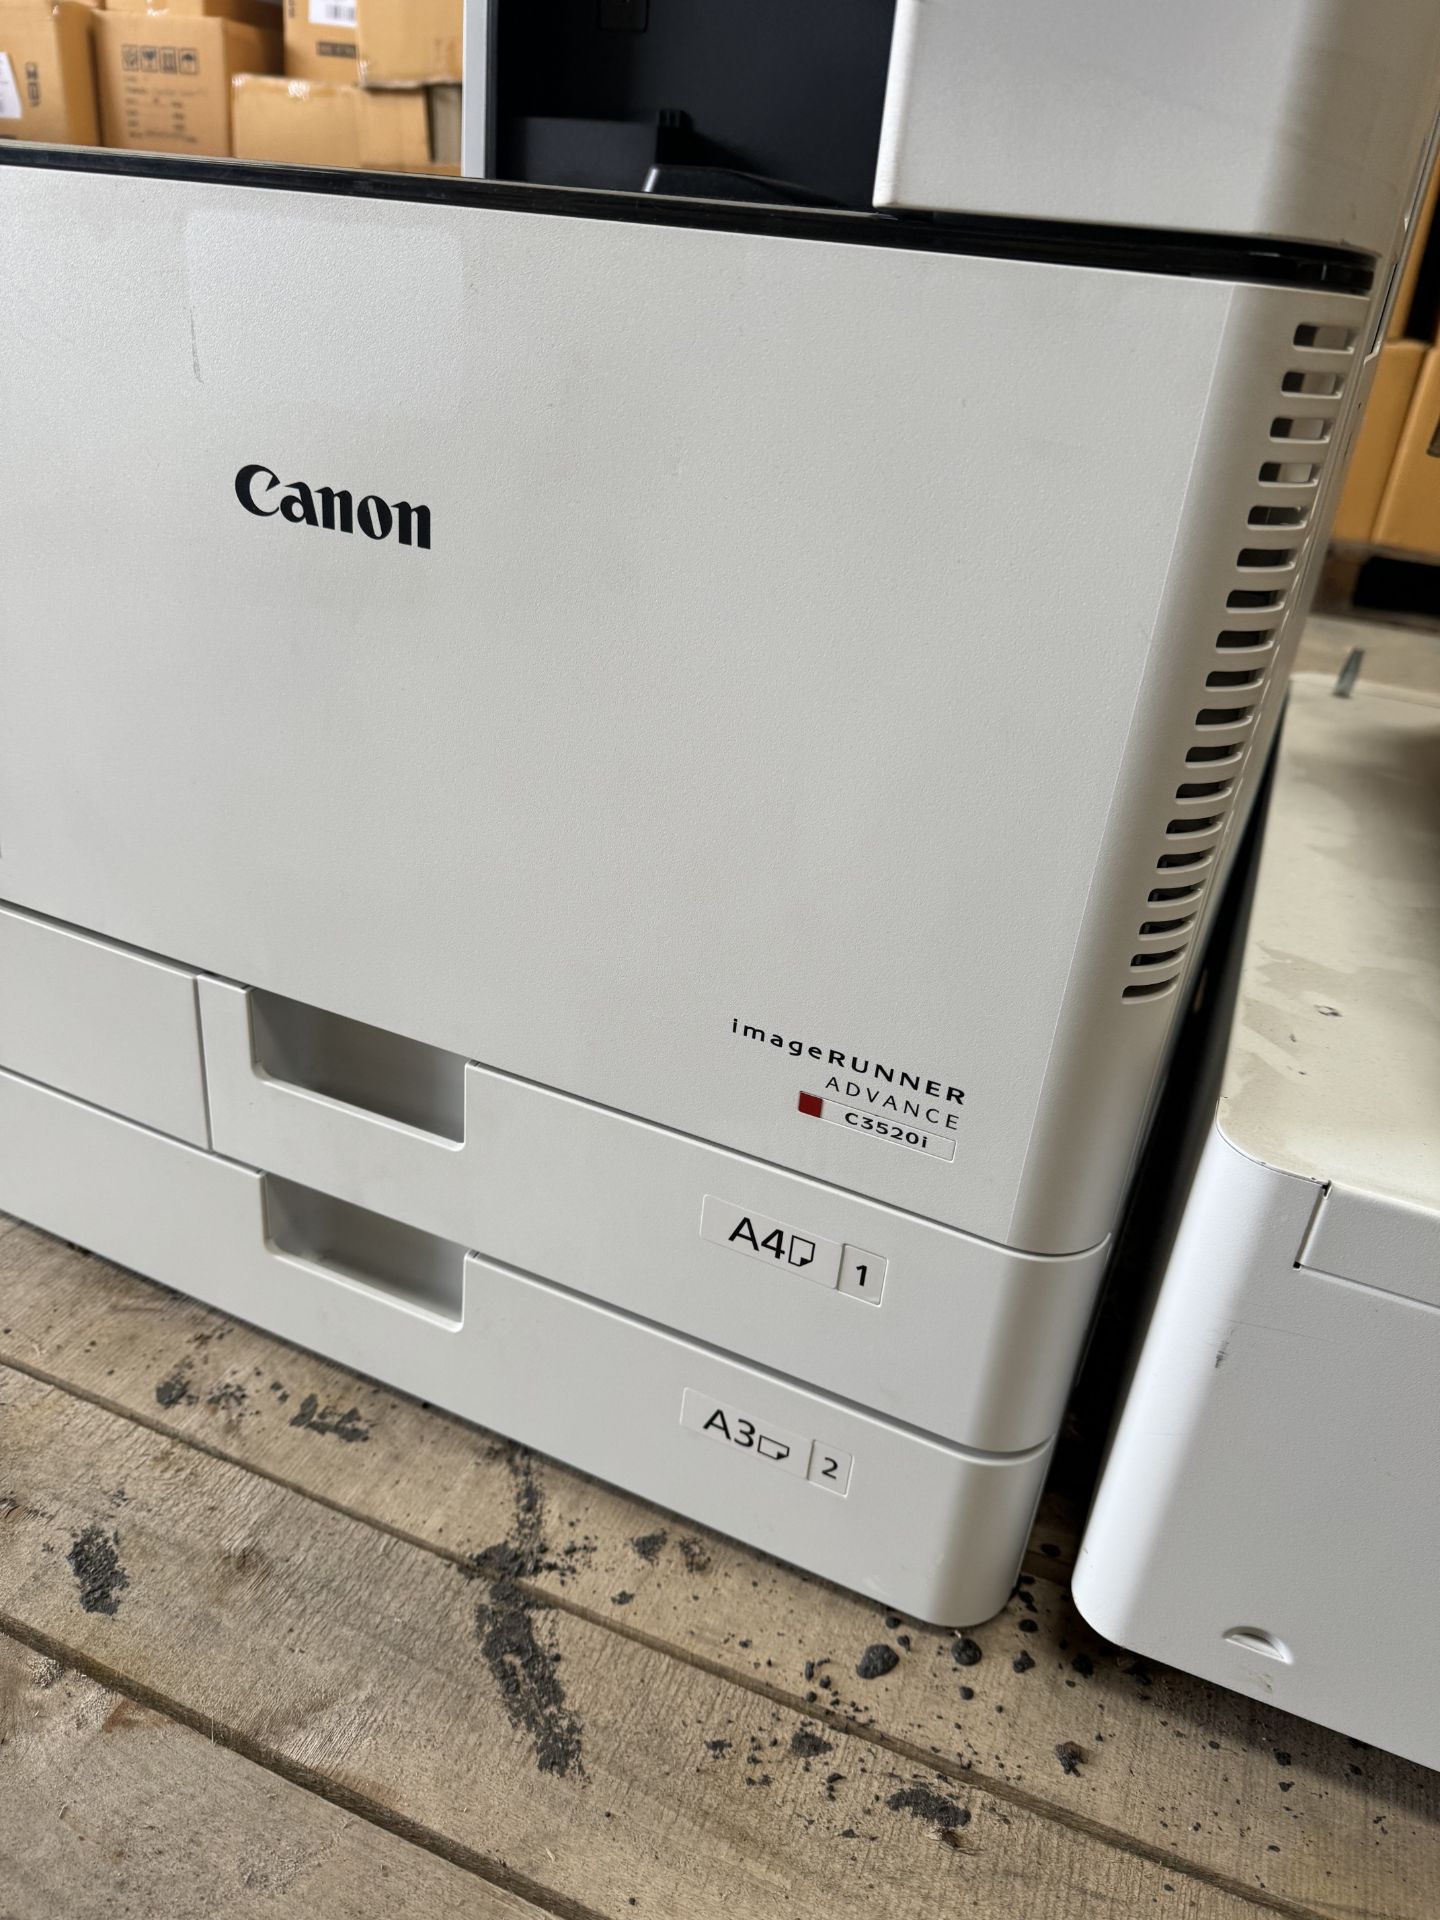 Canon Image Runner Advance C35201 - Image 2 of 4